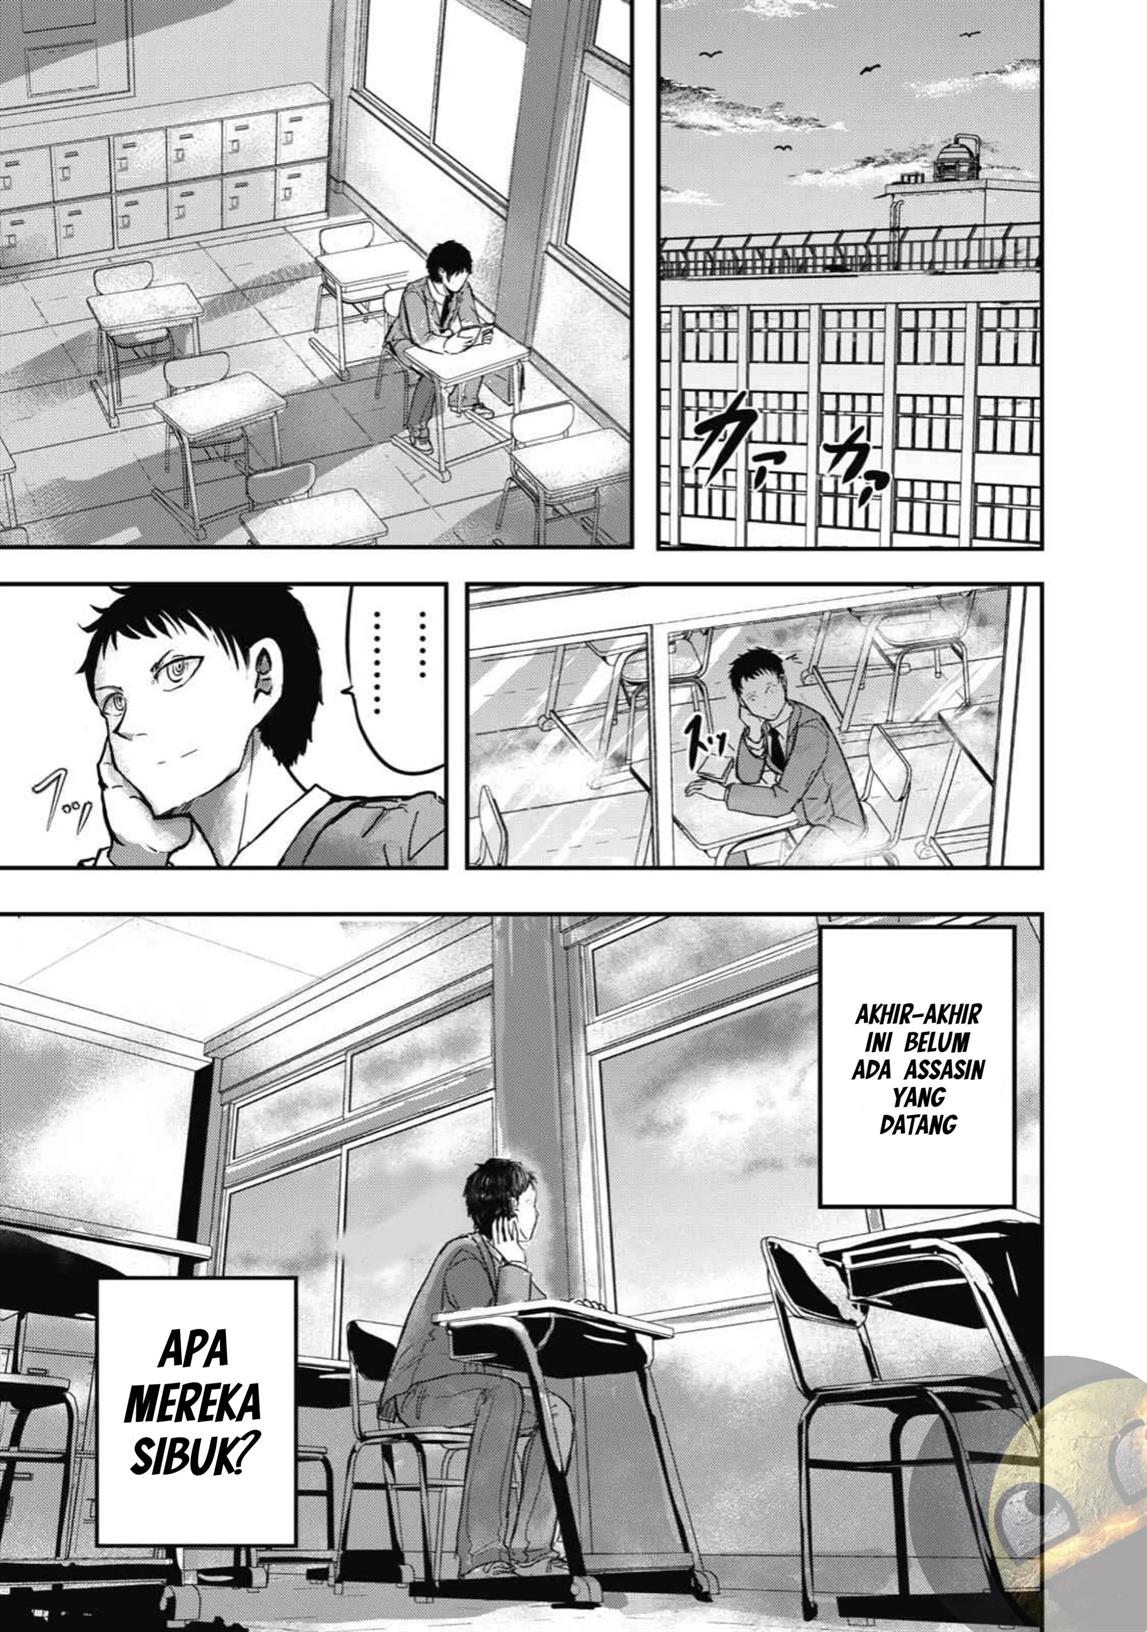 Gori-Sen ~The Type of PE Teacher to Die First During a Panic~ Chapter 3.5